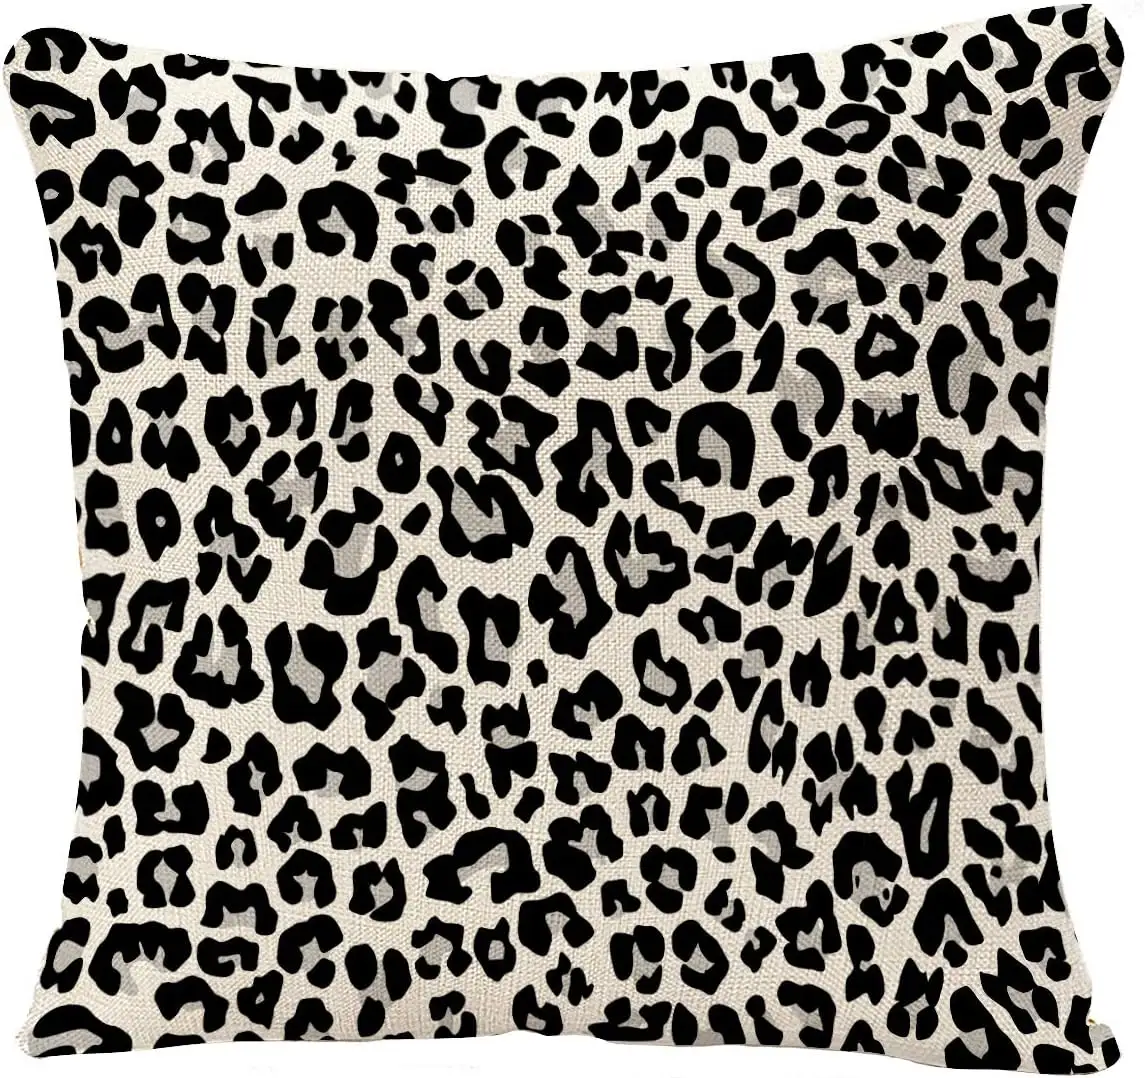 Latest Design animal Pillow Covers Pack of Animal Pillow Covers for Home Decor By Standard International